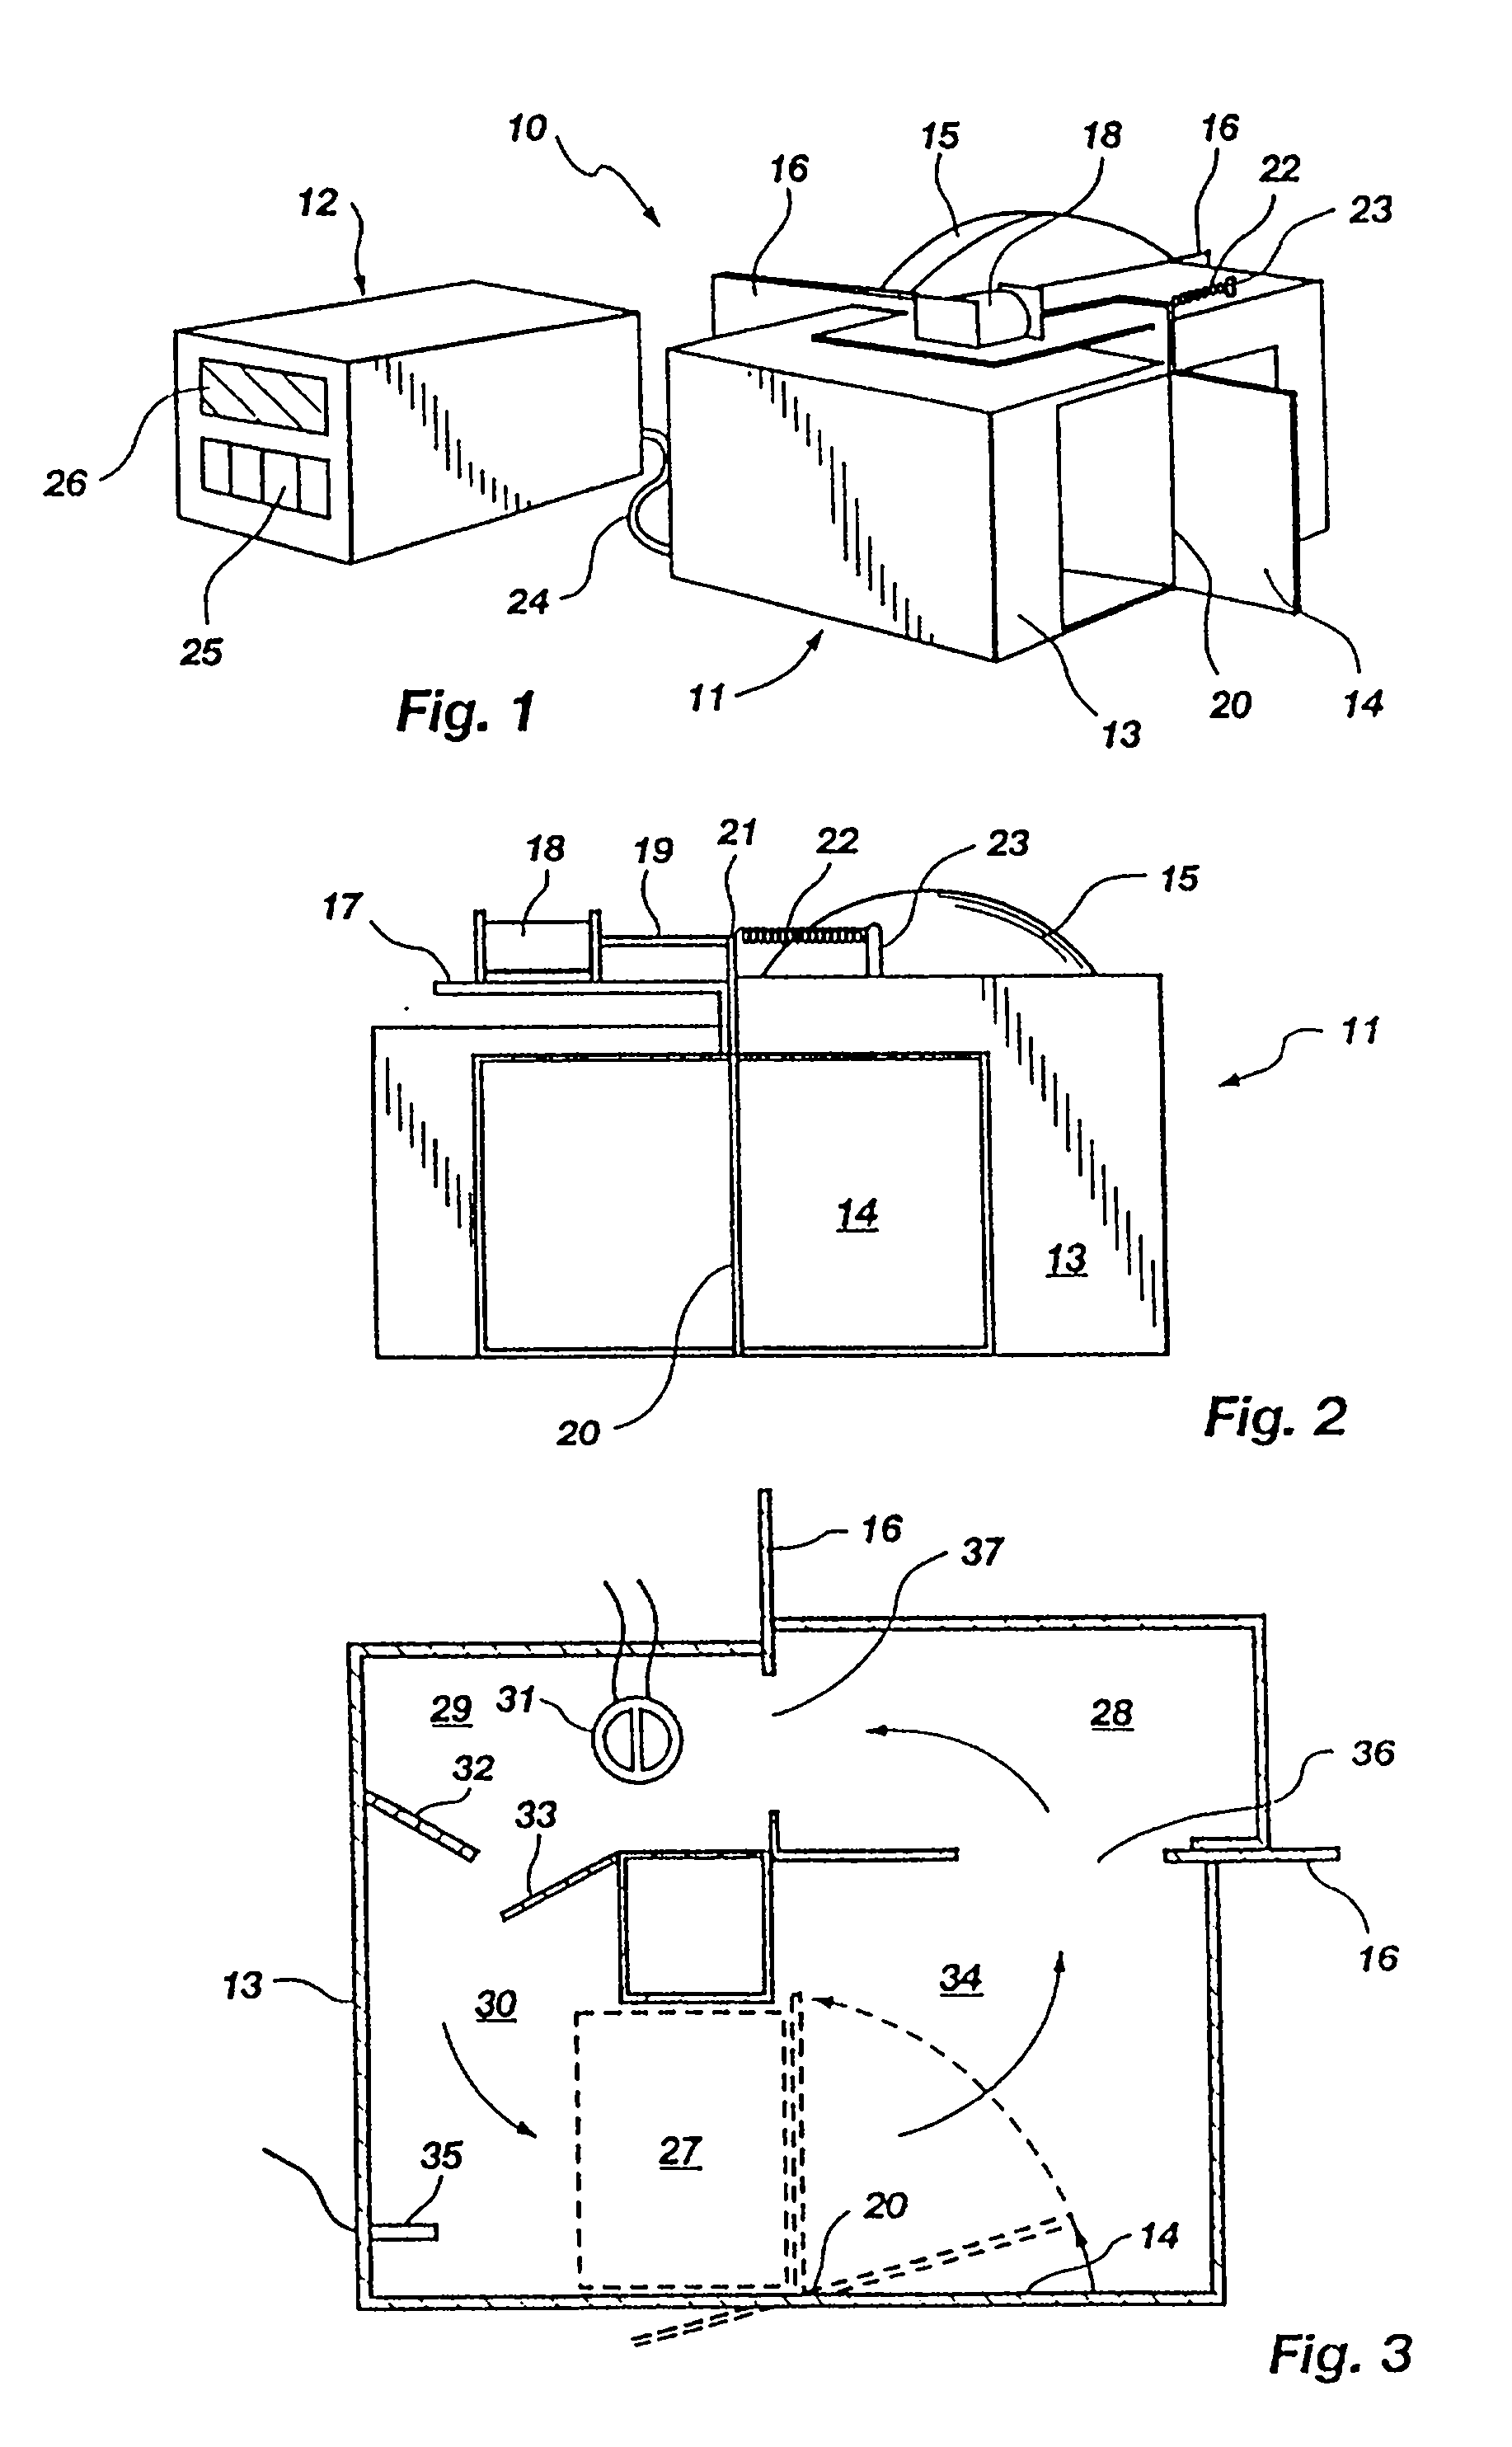 Method for rapid thermal cycling of biological samples